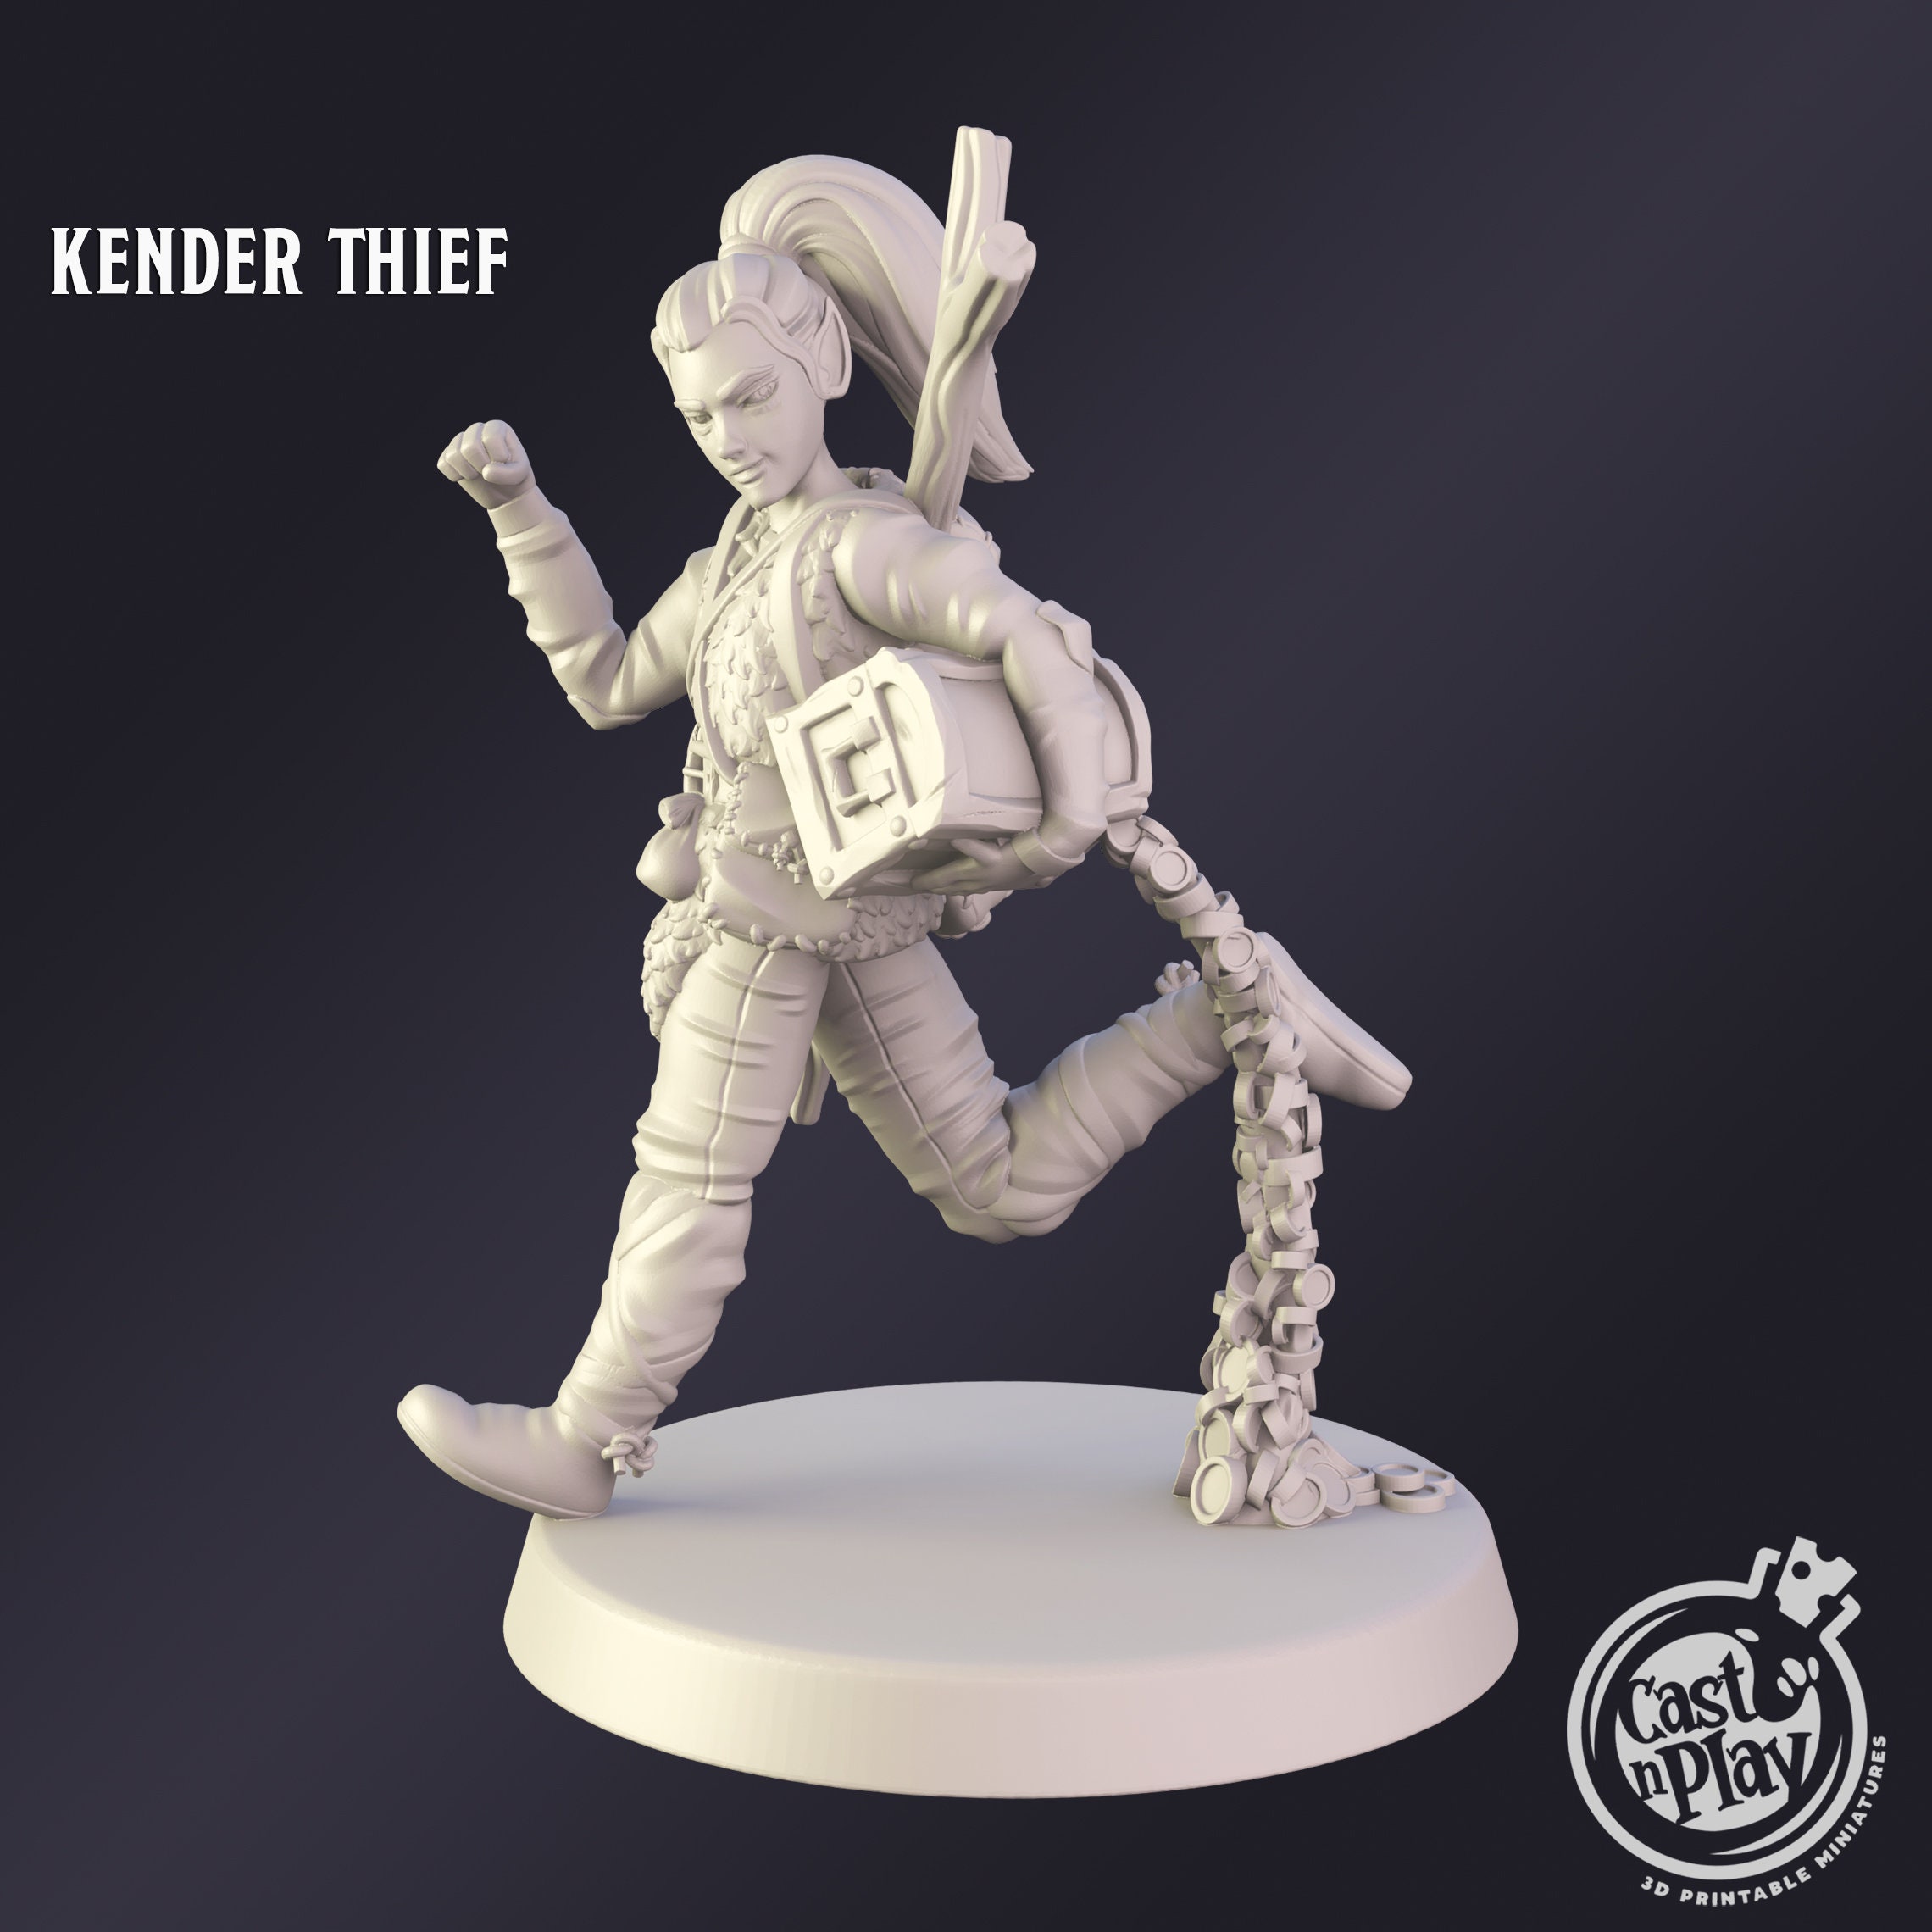 Kender Thief Premium Tabletop Game Miniature From Cast N Play